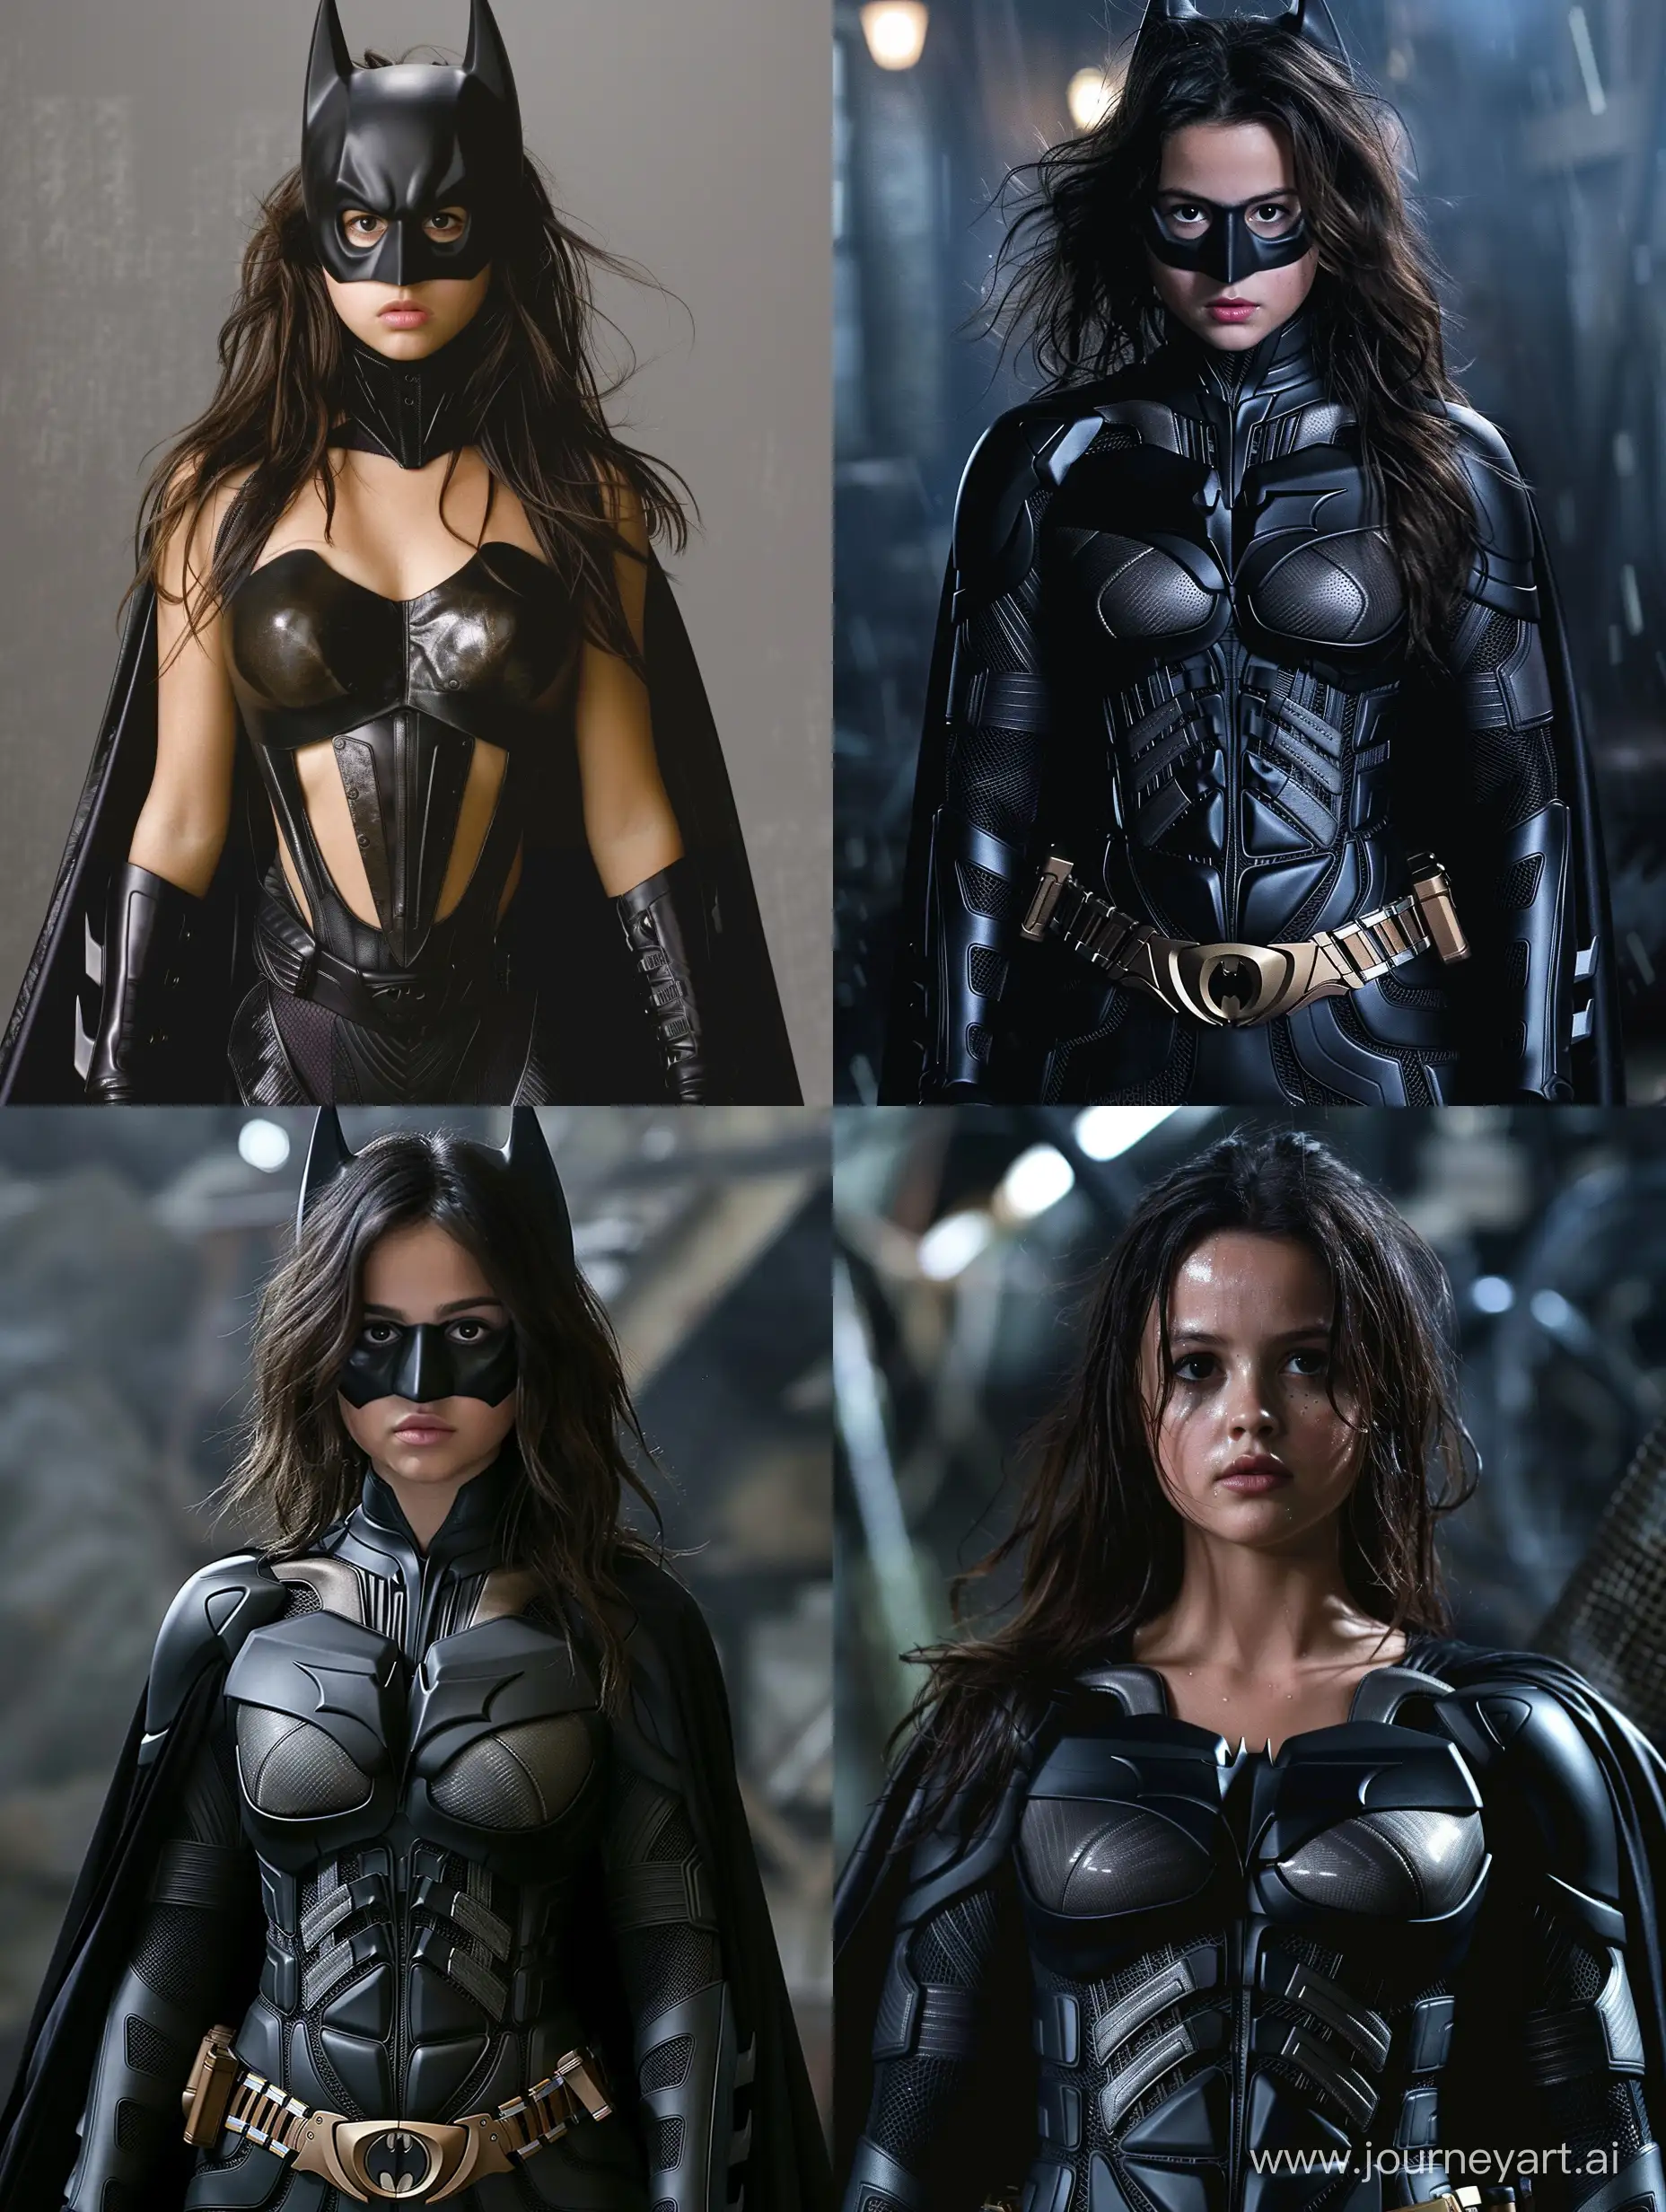 Selena-Gomez-Portraying-a-Mysterious-Character-in-a-Batman-Movie-Scene